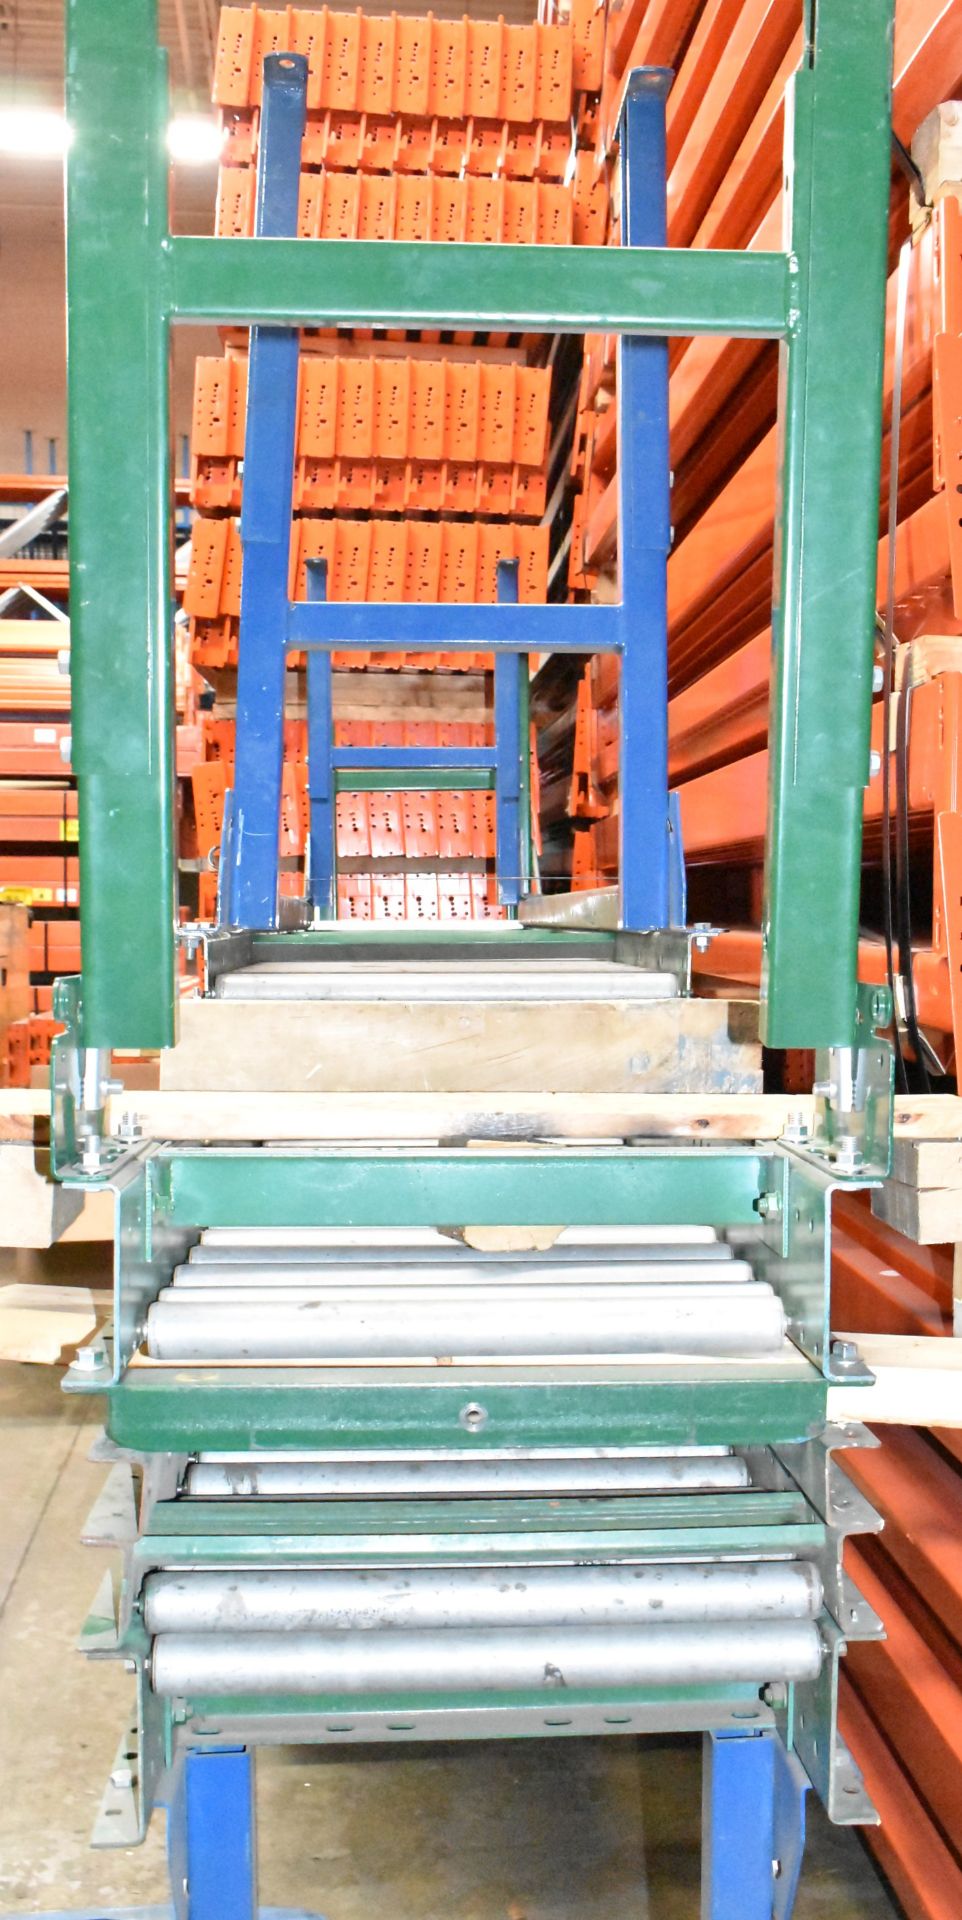 LOT/ RAPISTAN SYSTEMS ROLLER CONVEYOR WITH 1.5" ROLLERS - Image 2 of 2